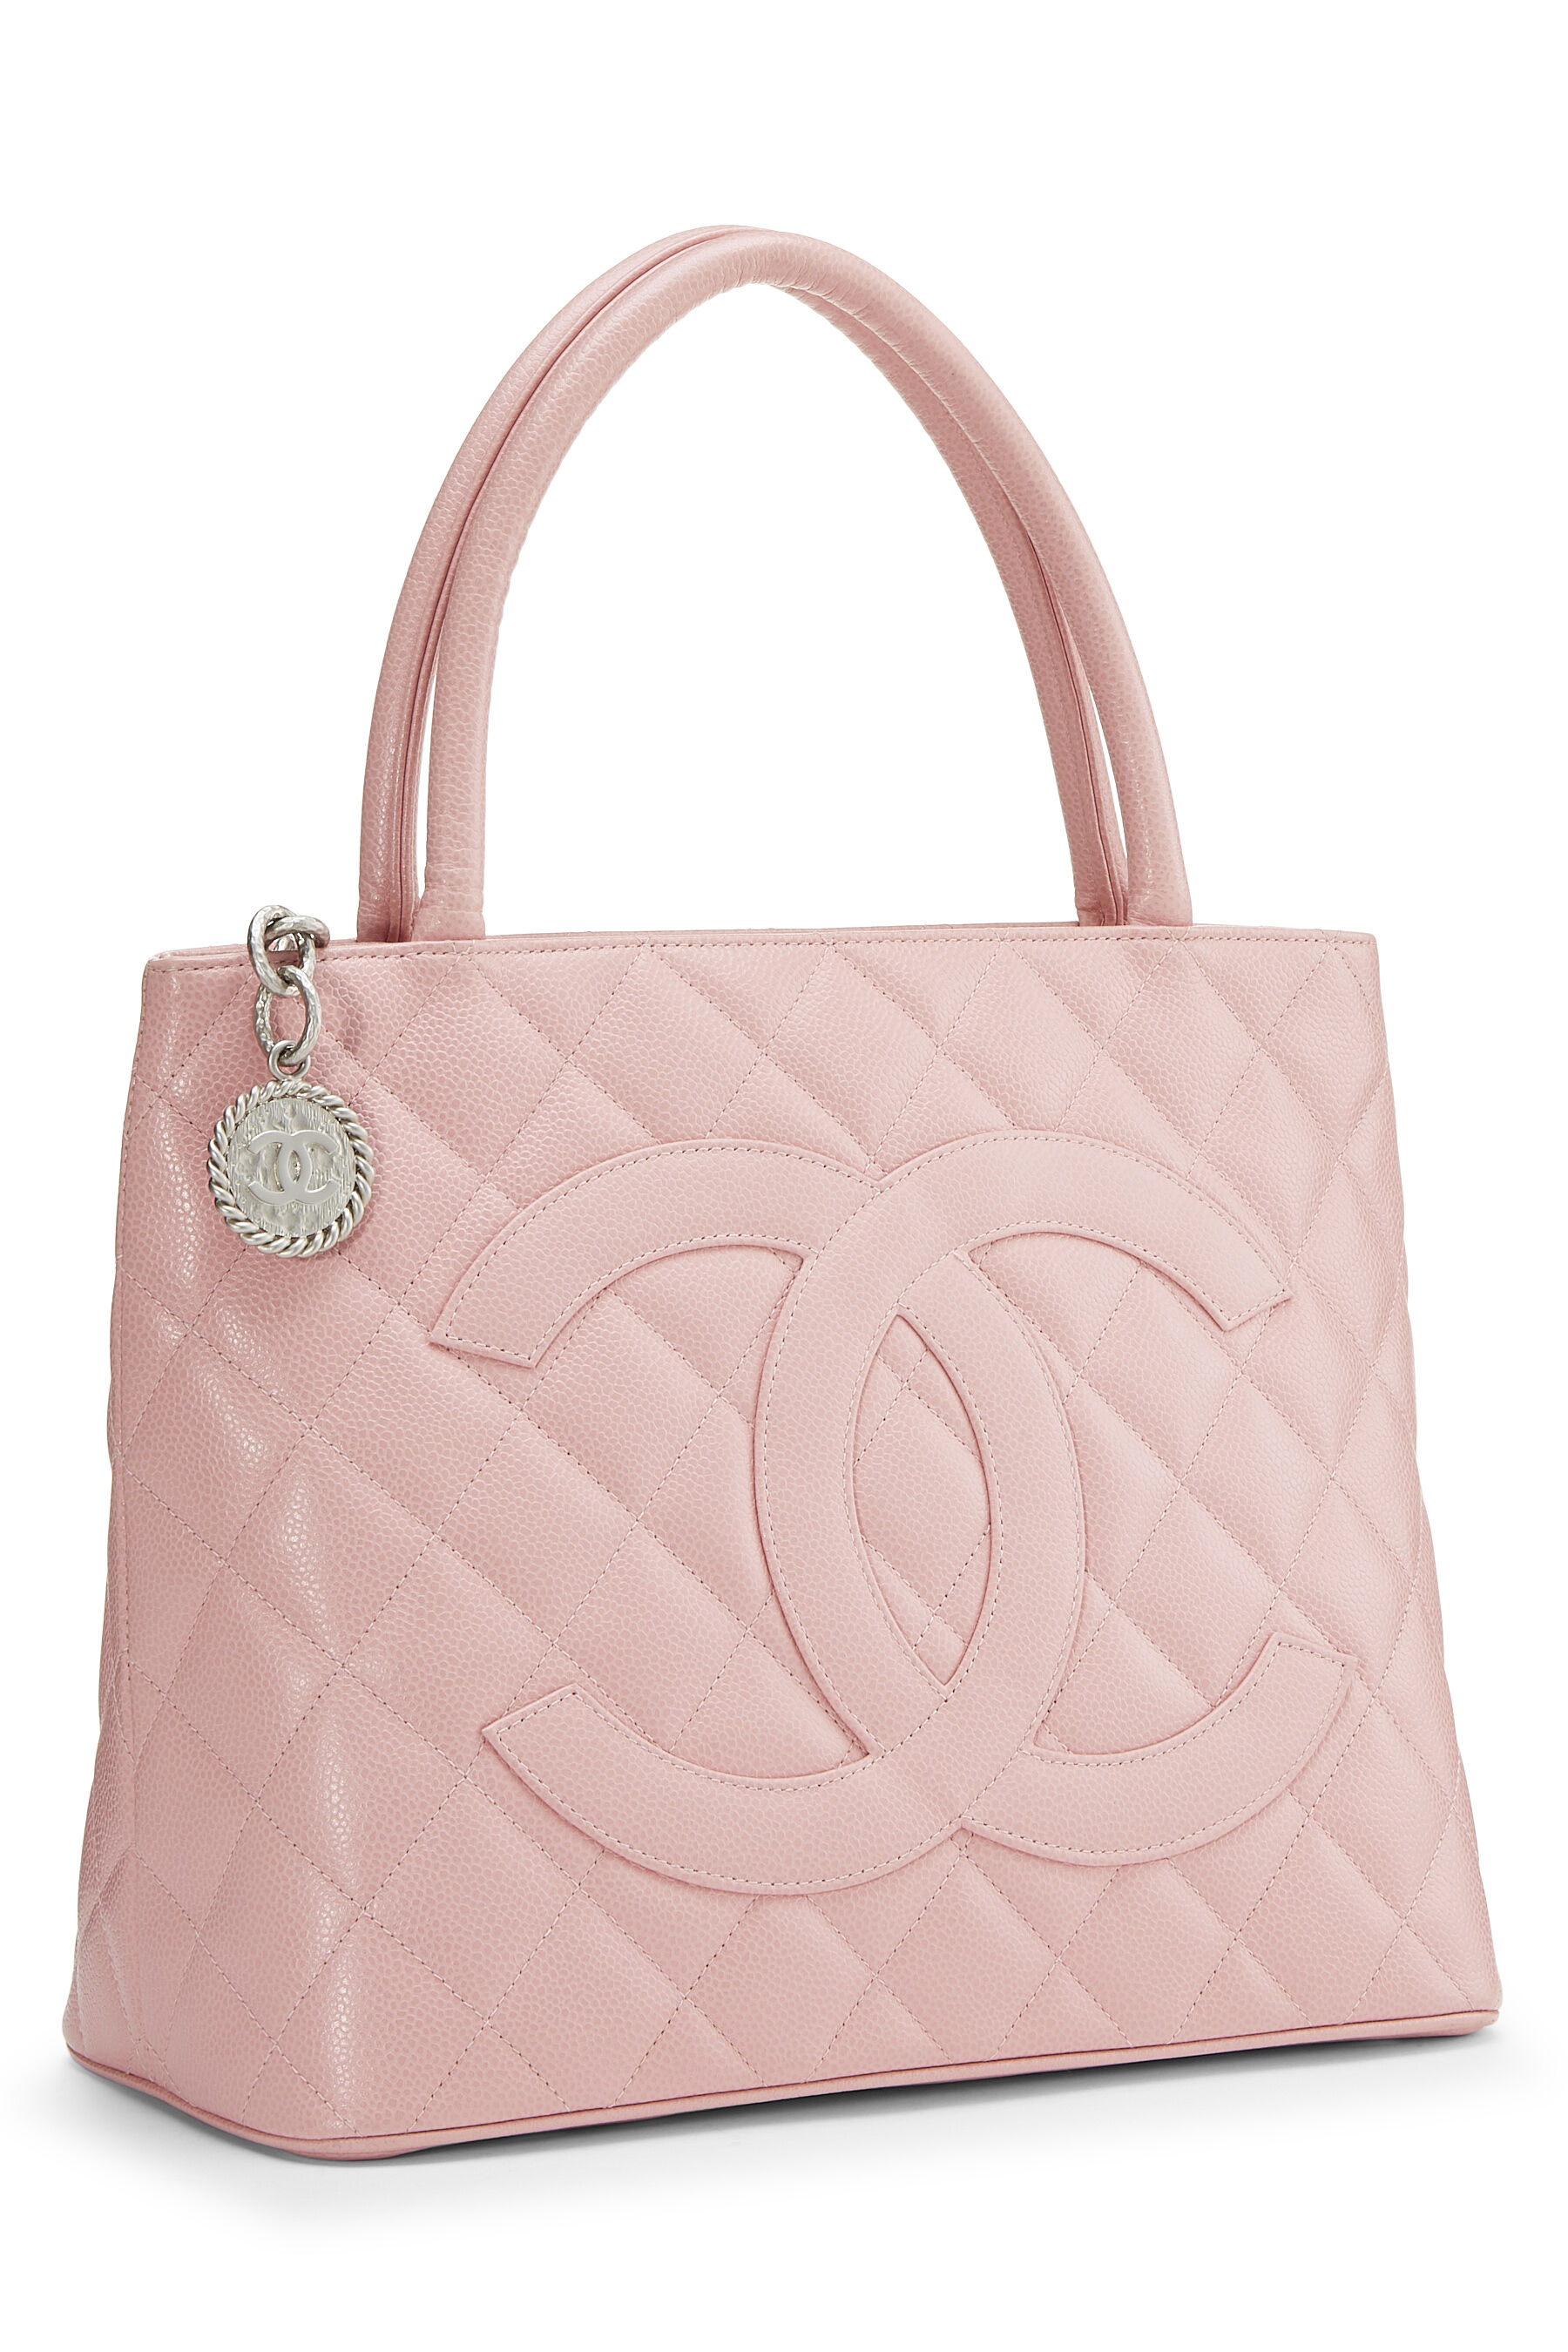 Authentic New Chanel Pink Caviar Leather Medallion Tote Shoulder Bag